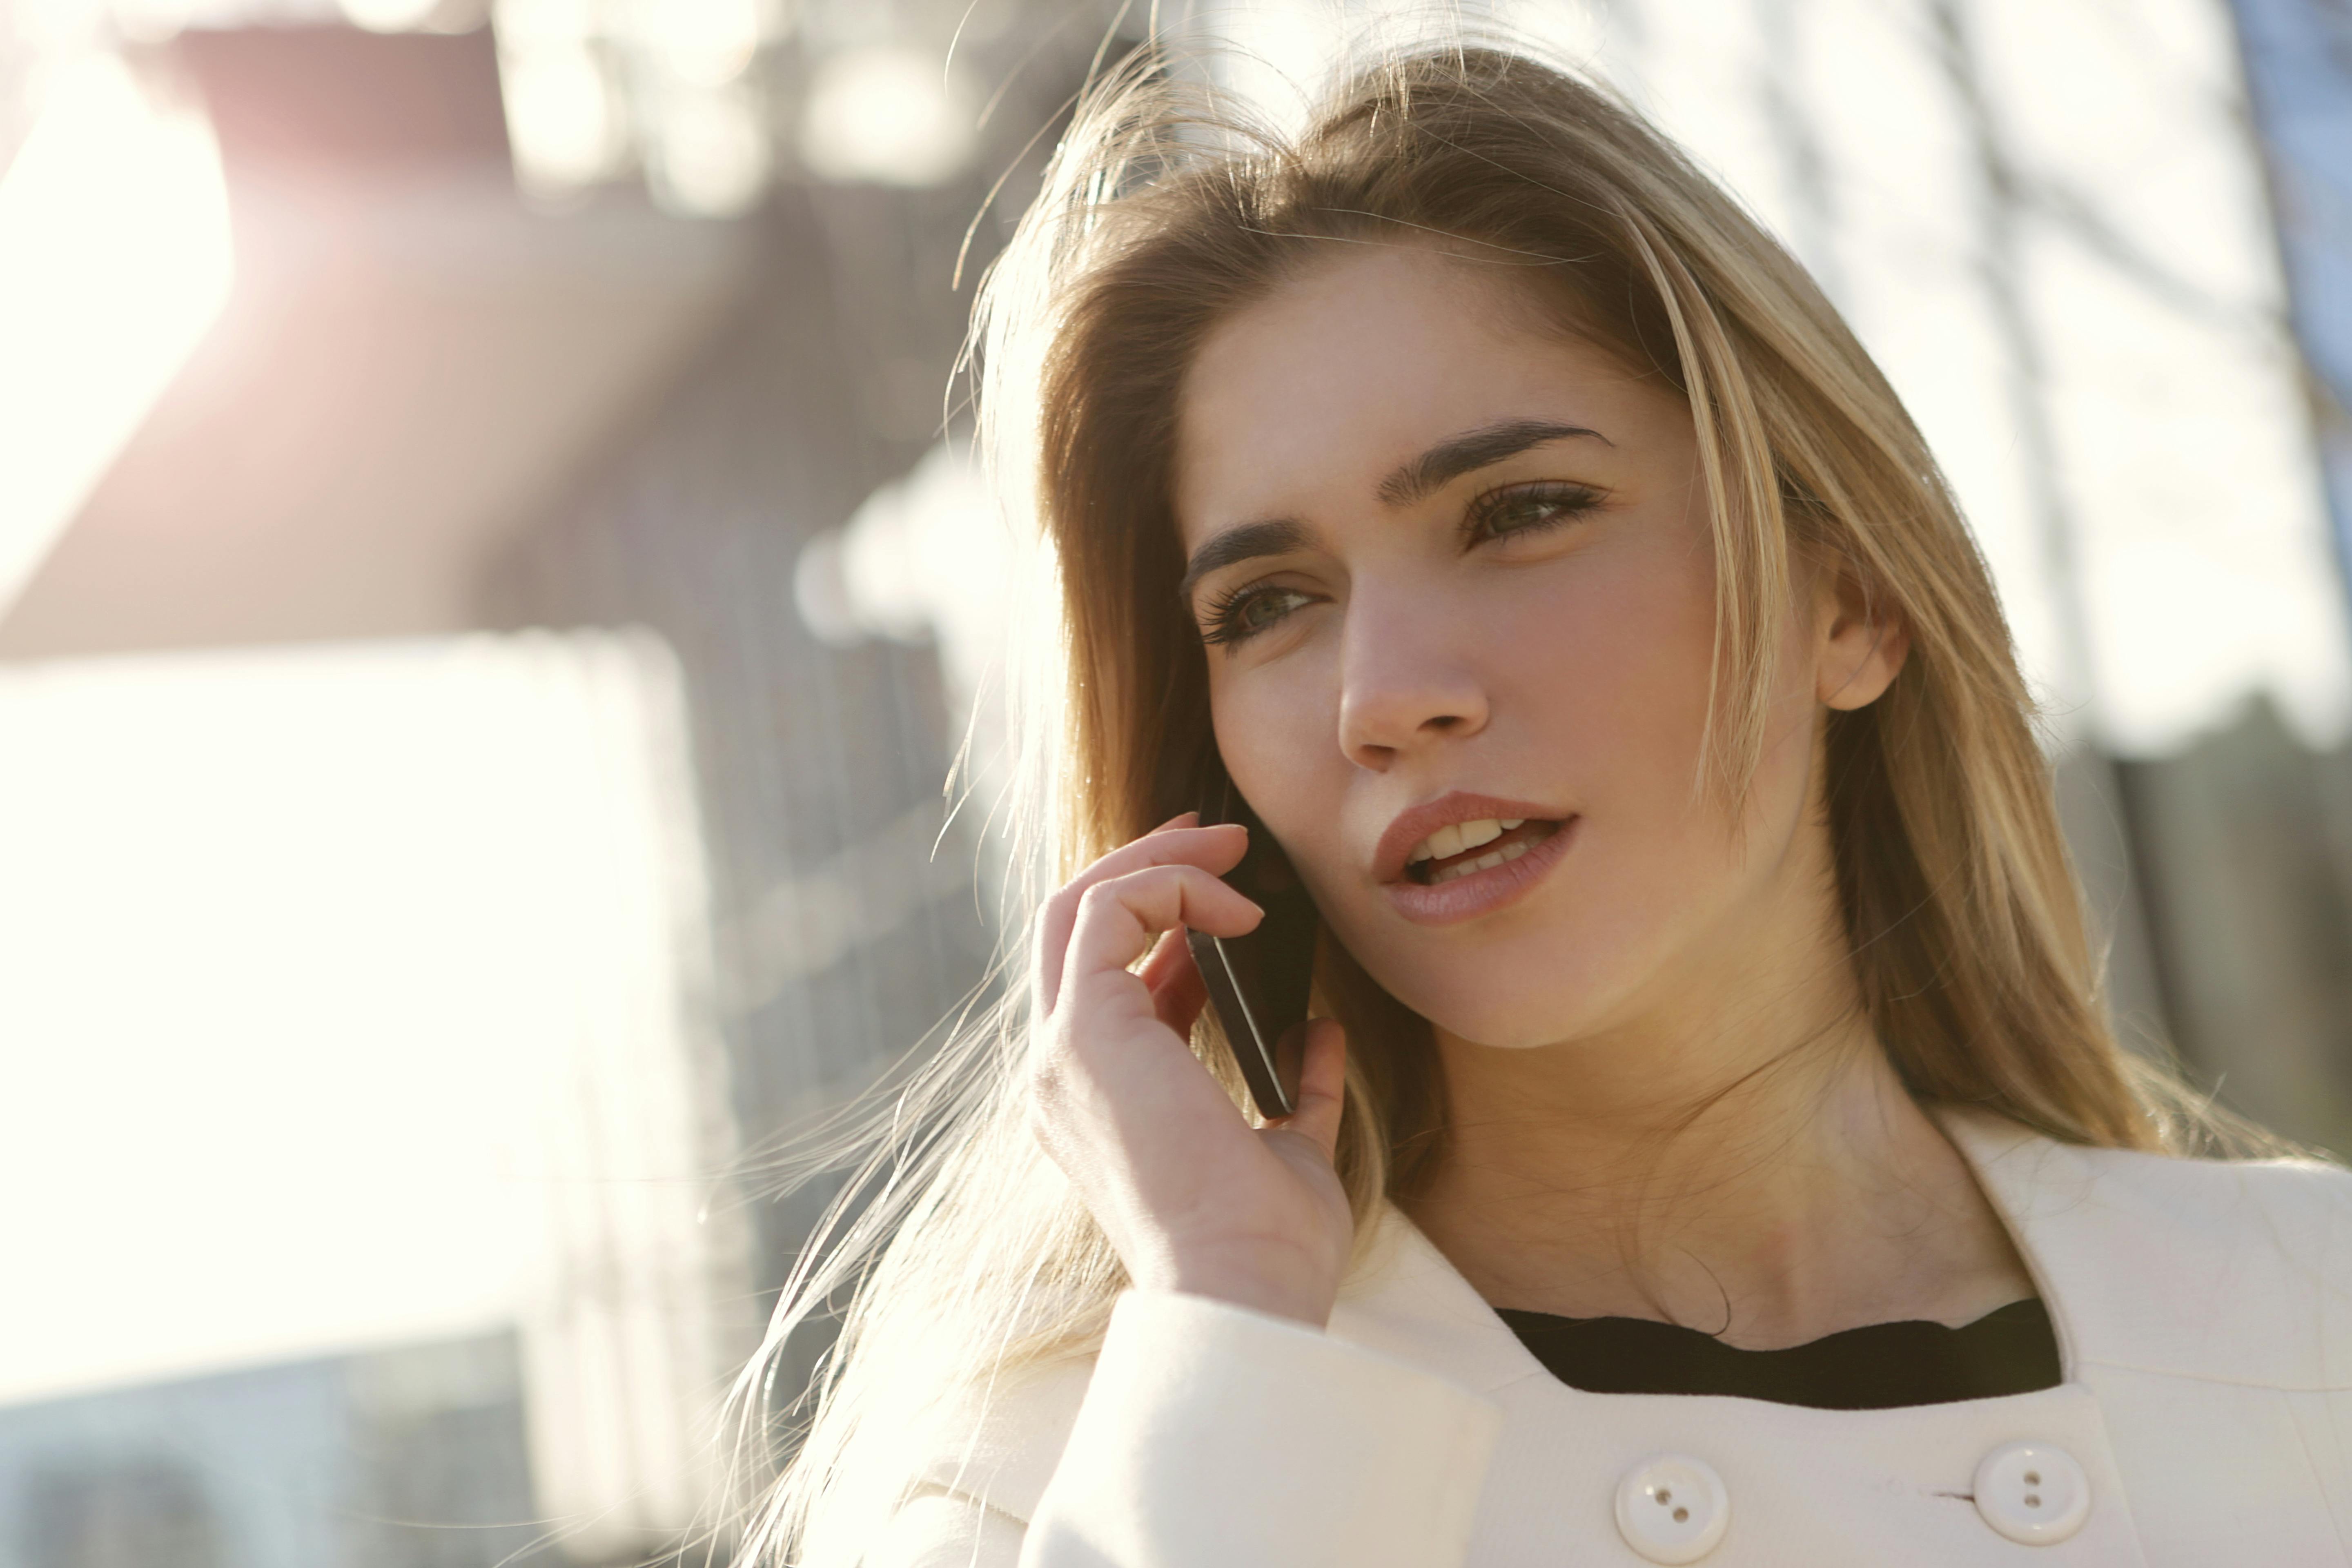 A woman talking to someone on the phone | Source: Pexels